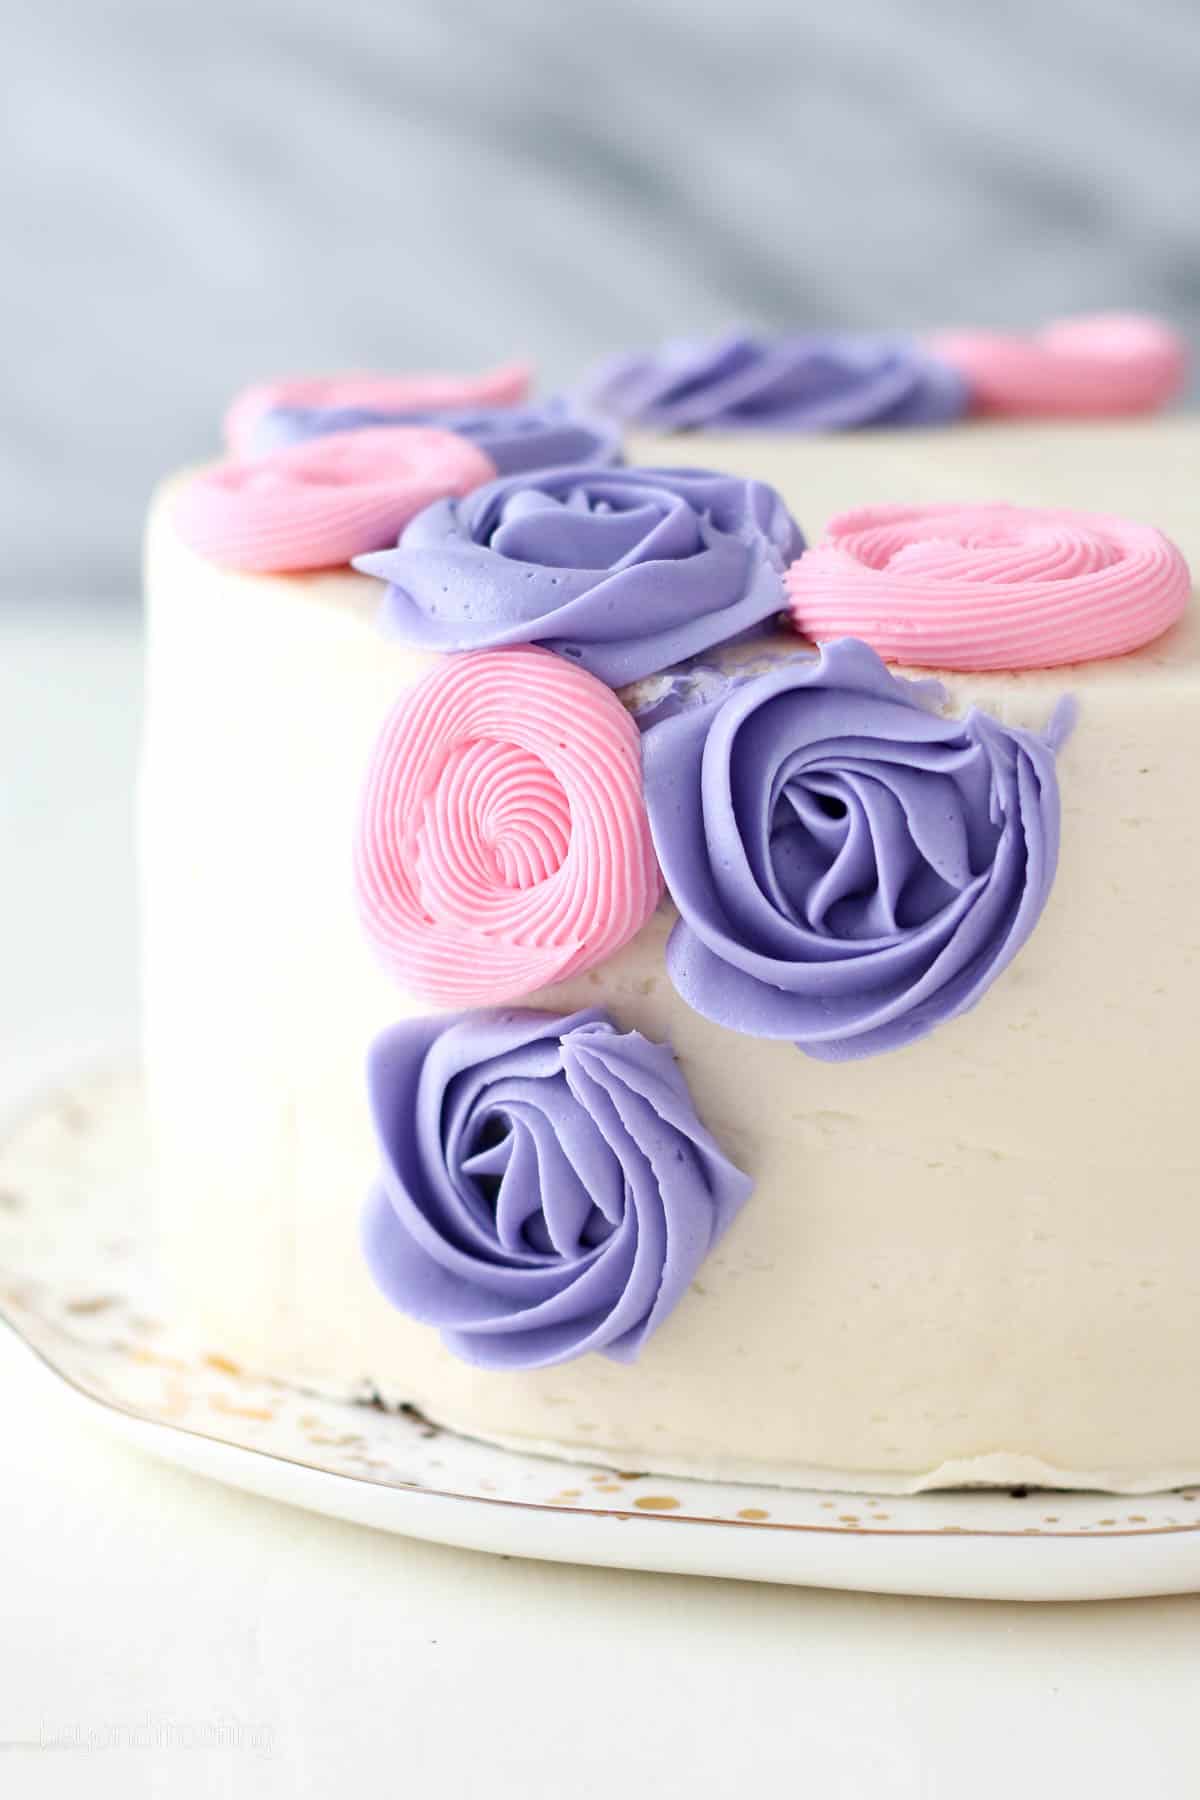 Side view of a cake frosted white, partially decorated with purple and pink buttercream roses.